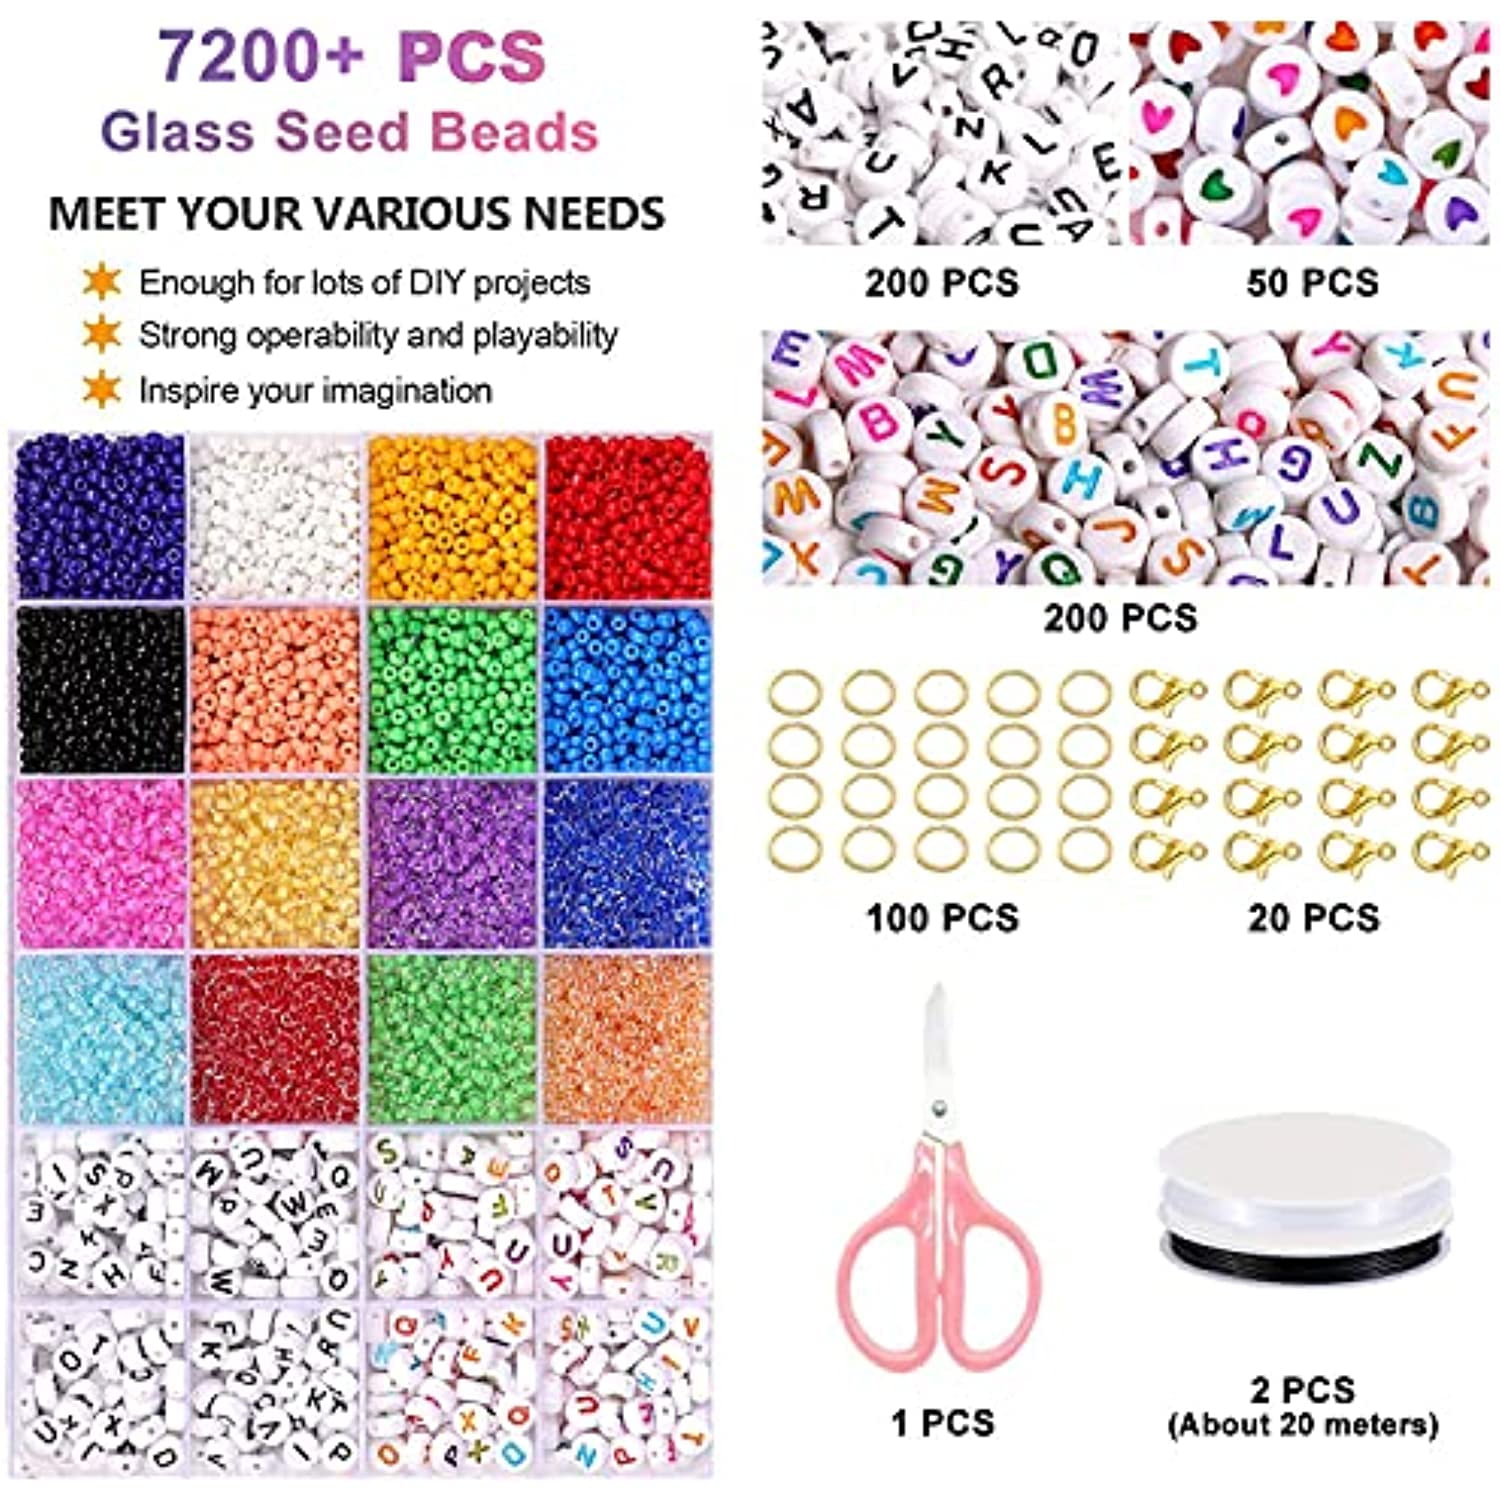 7000PCS 3mm Glass Seed Beads Bracelets Making Kit，400pcs Alphabet Letter  Beads for Jewelry Making and Crafts with Elastic String Cords，Pendants